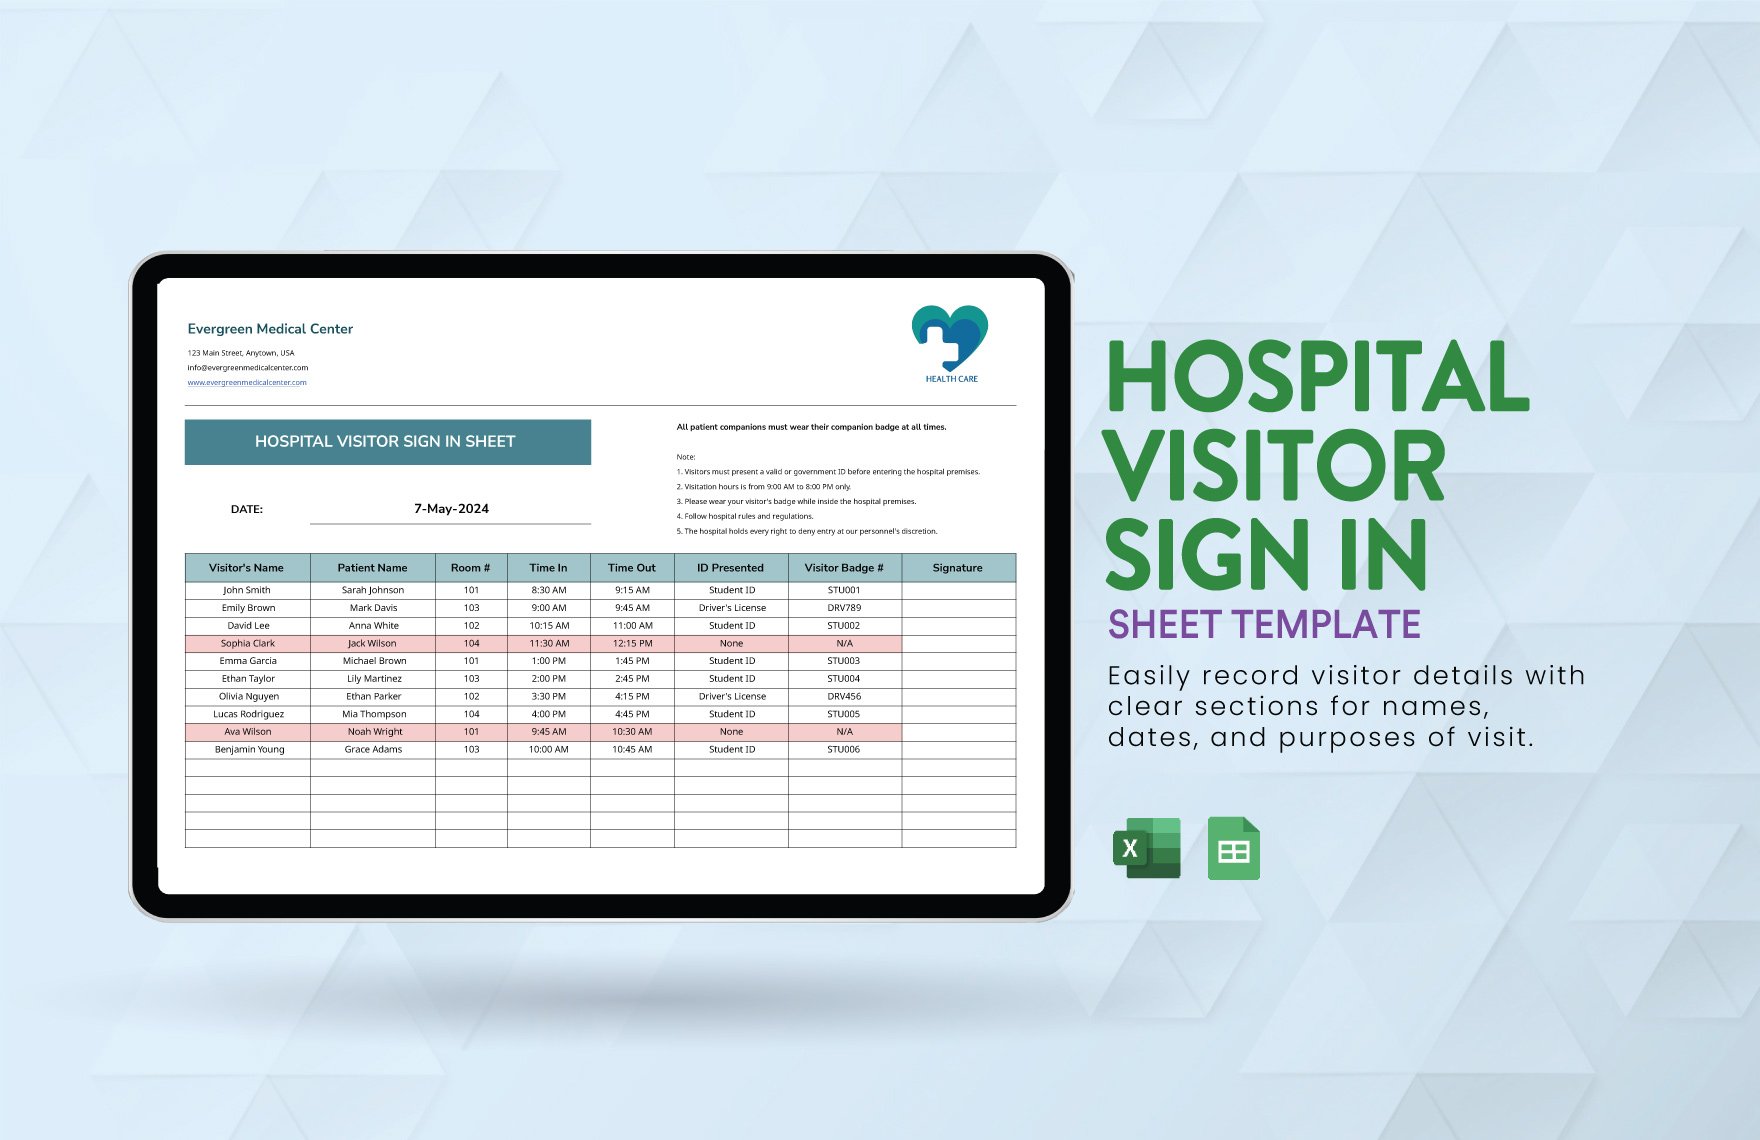 Hospital Visitor Sign in Sheet Template in Excel, Google Sheets